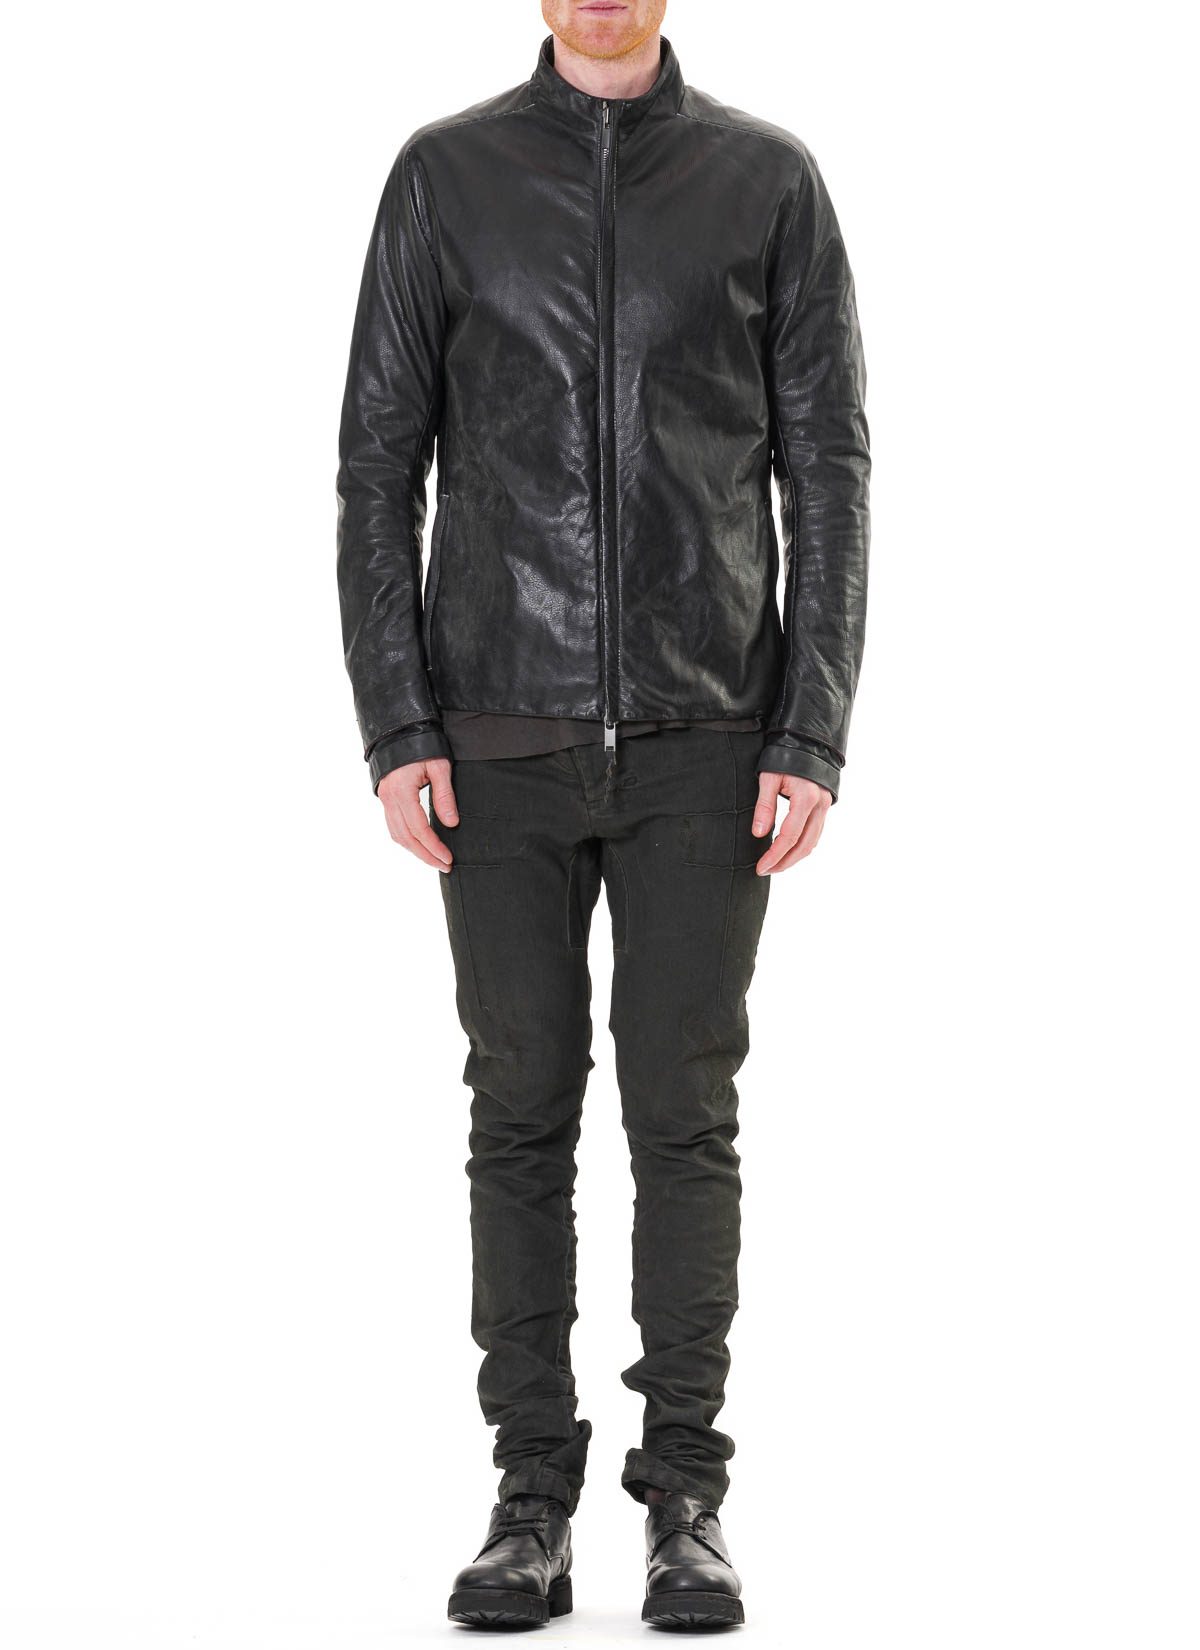 LAYER-0 Classic H Jacket, black, calf leather